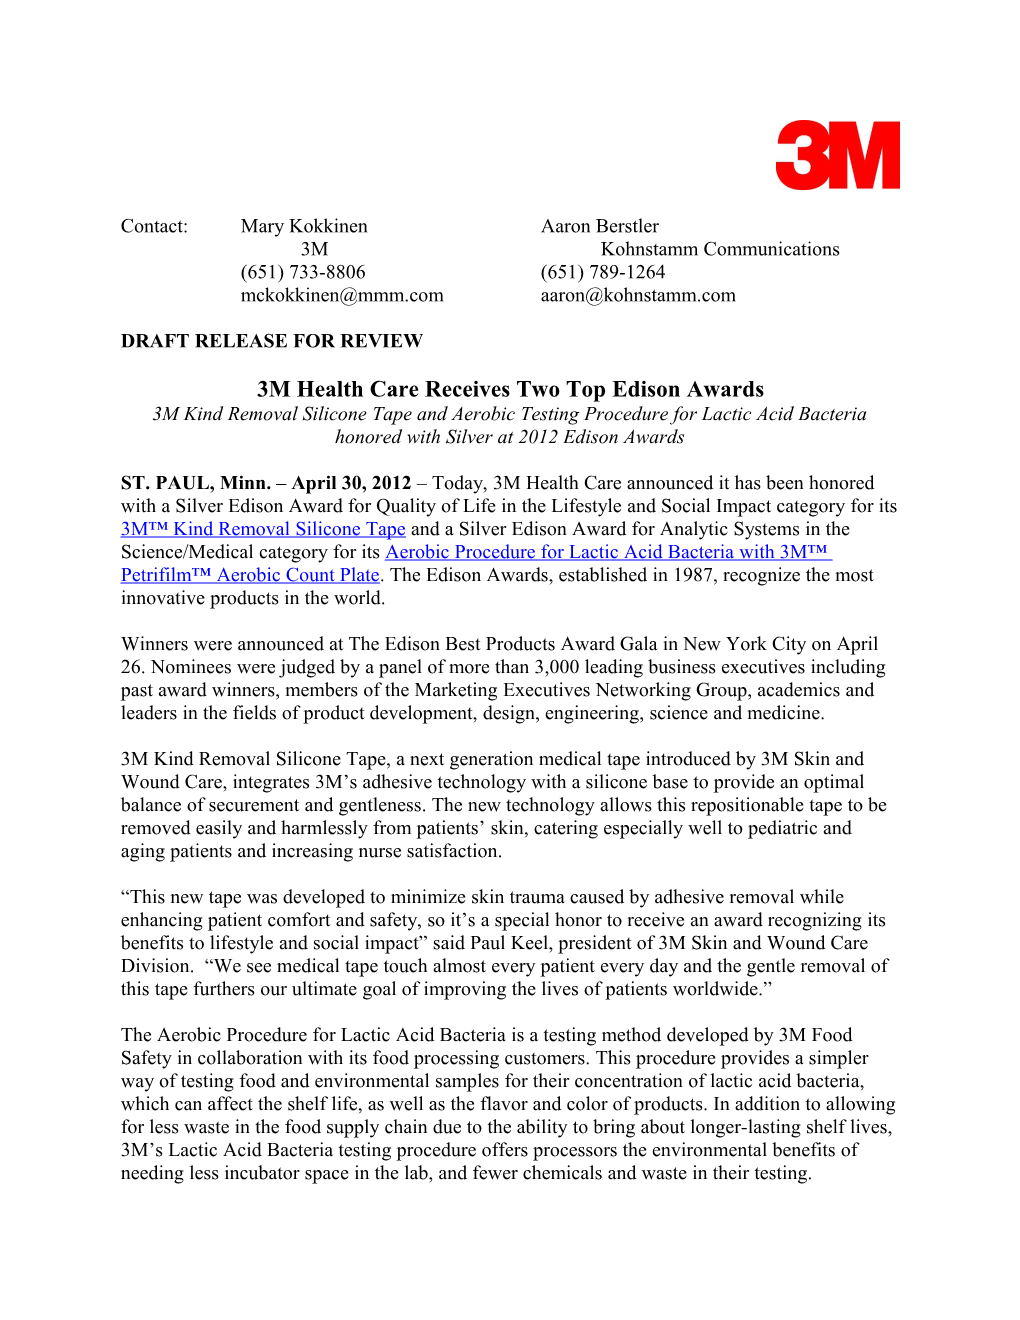 3M Health Care Receives Two Top Edison Awards